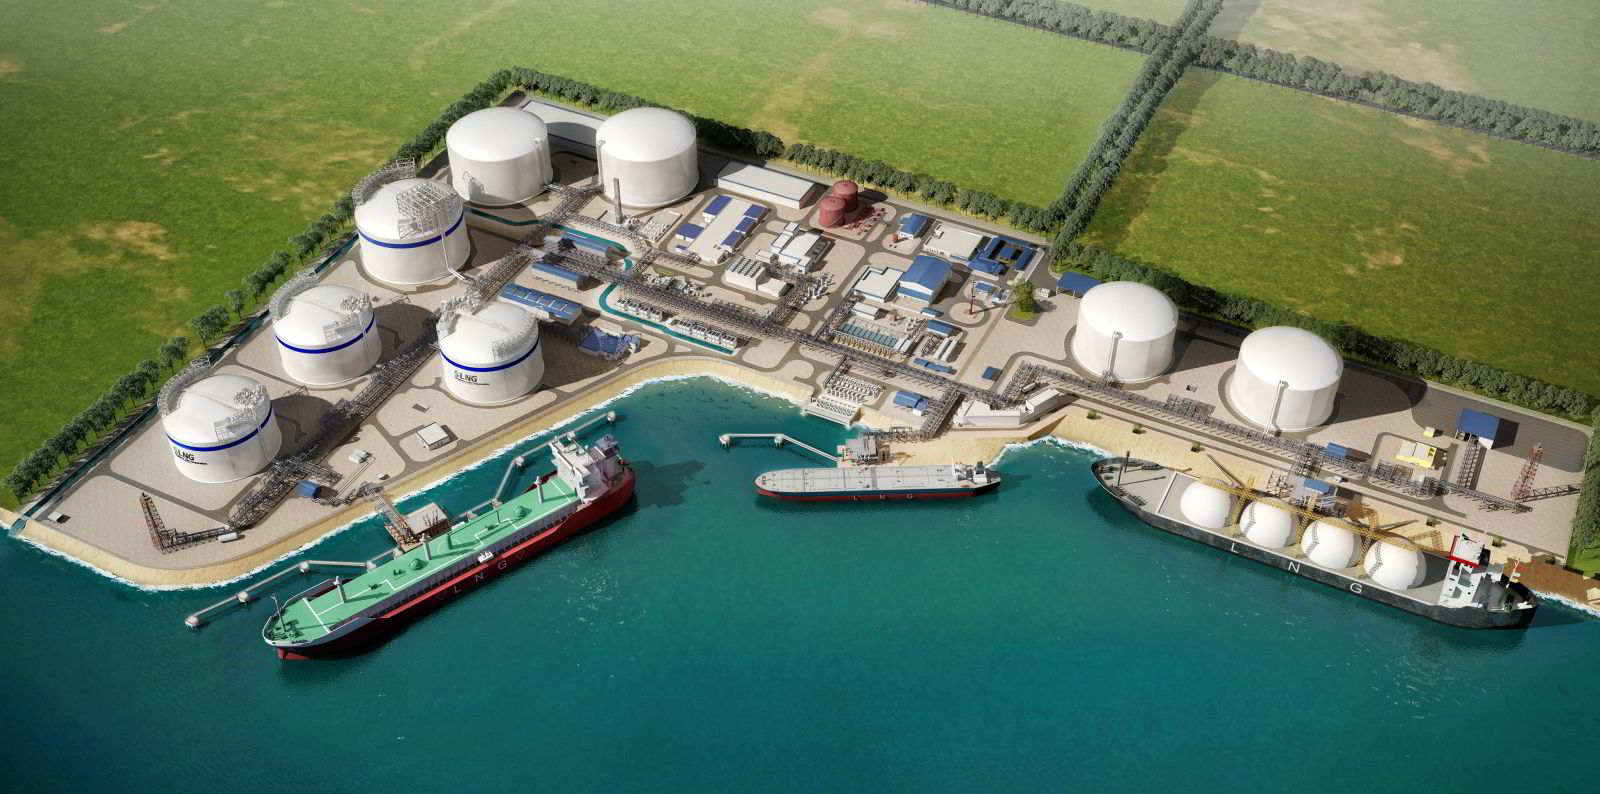 Saipem signs pact for next phase of development at Singapore LNG